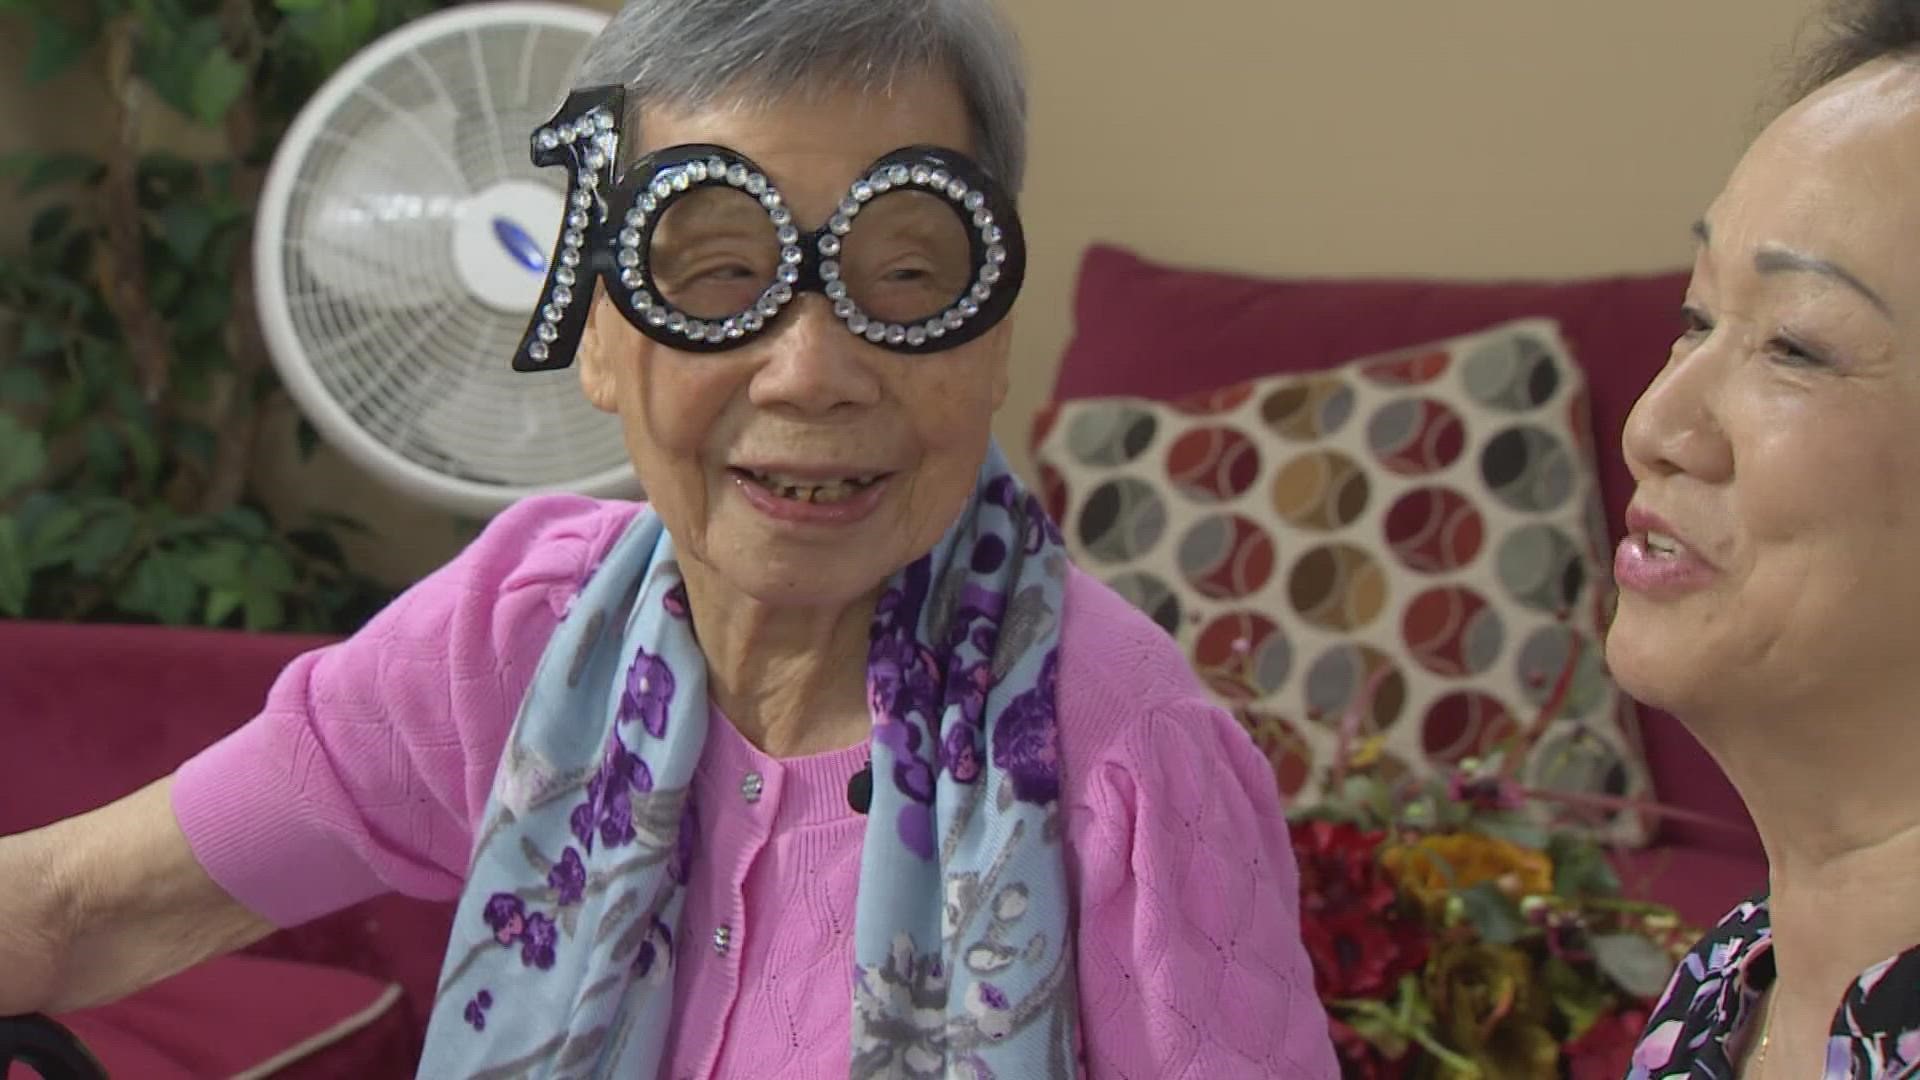 Sunny Ng was born in Hong Kong in 1922. She moved to Dallas in 1962 and never learned English.